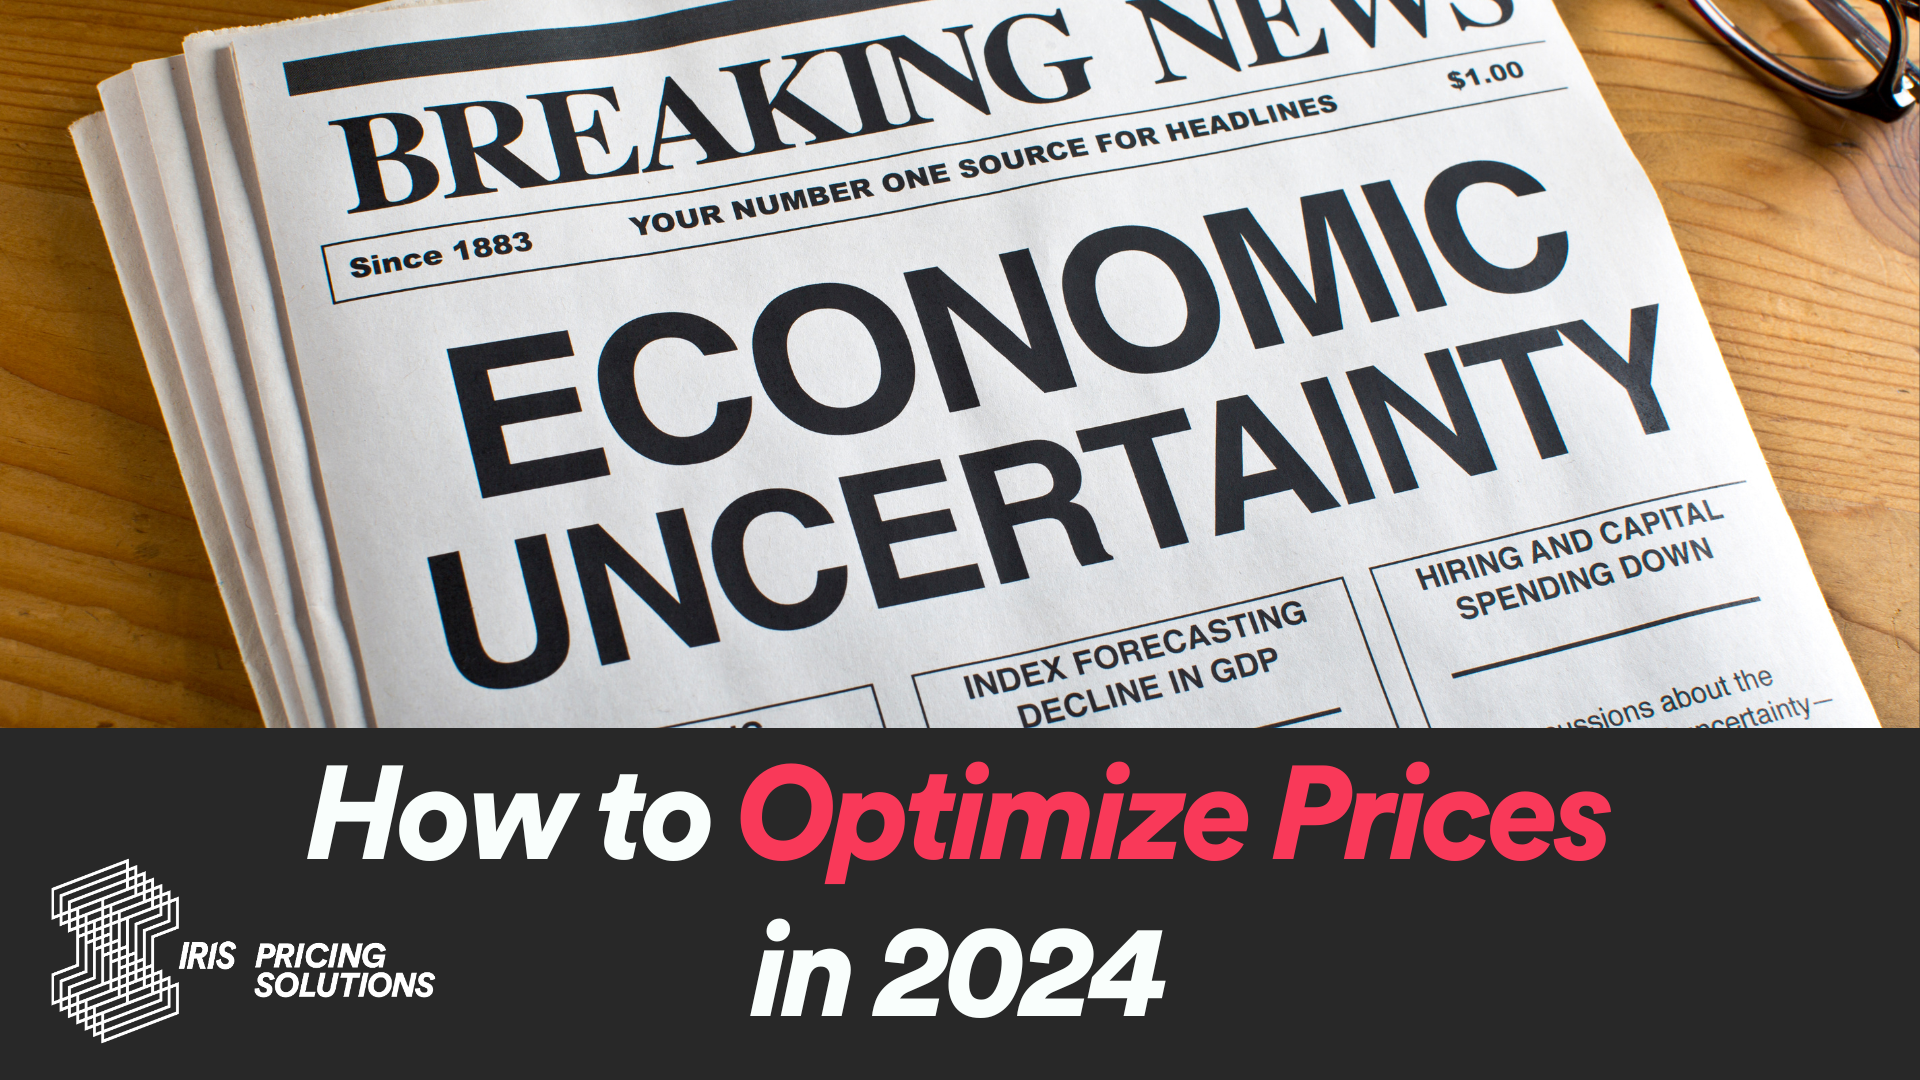 How to Optimize Prices in 2024?